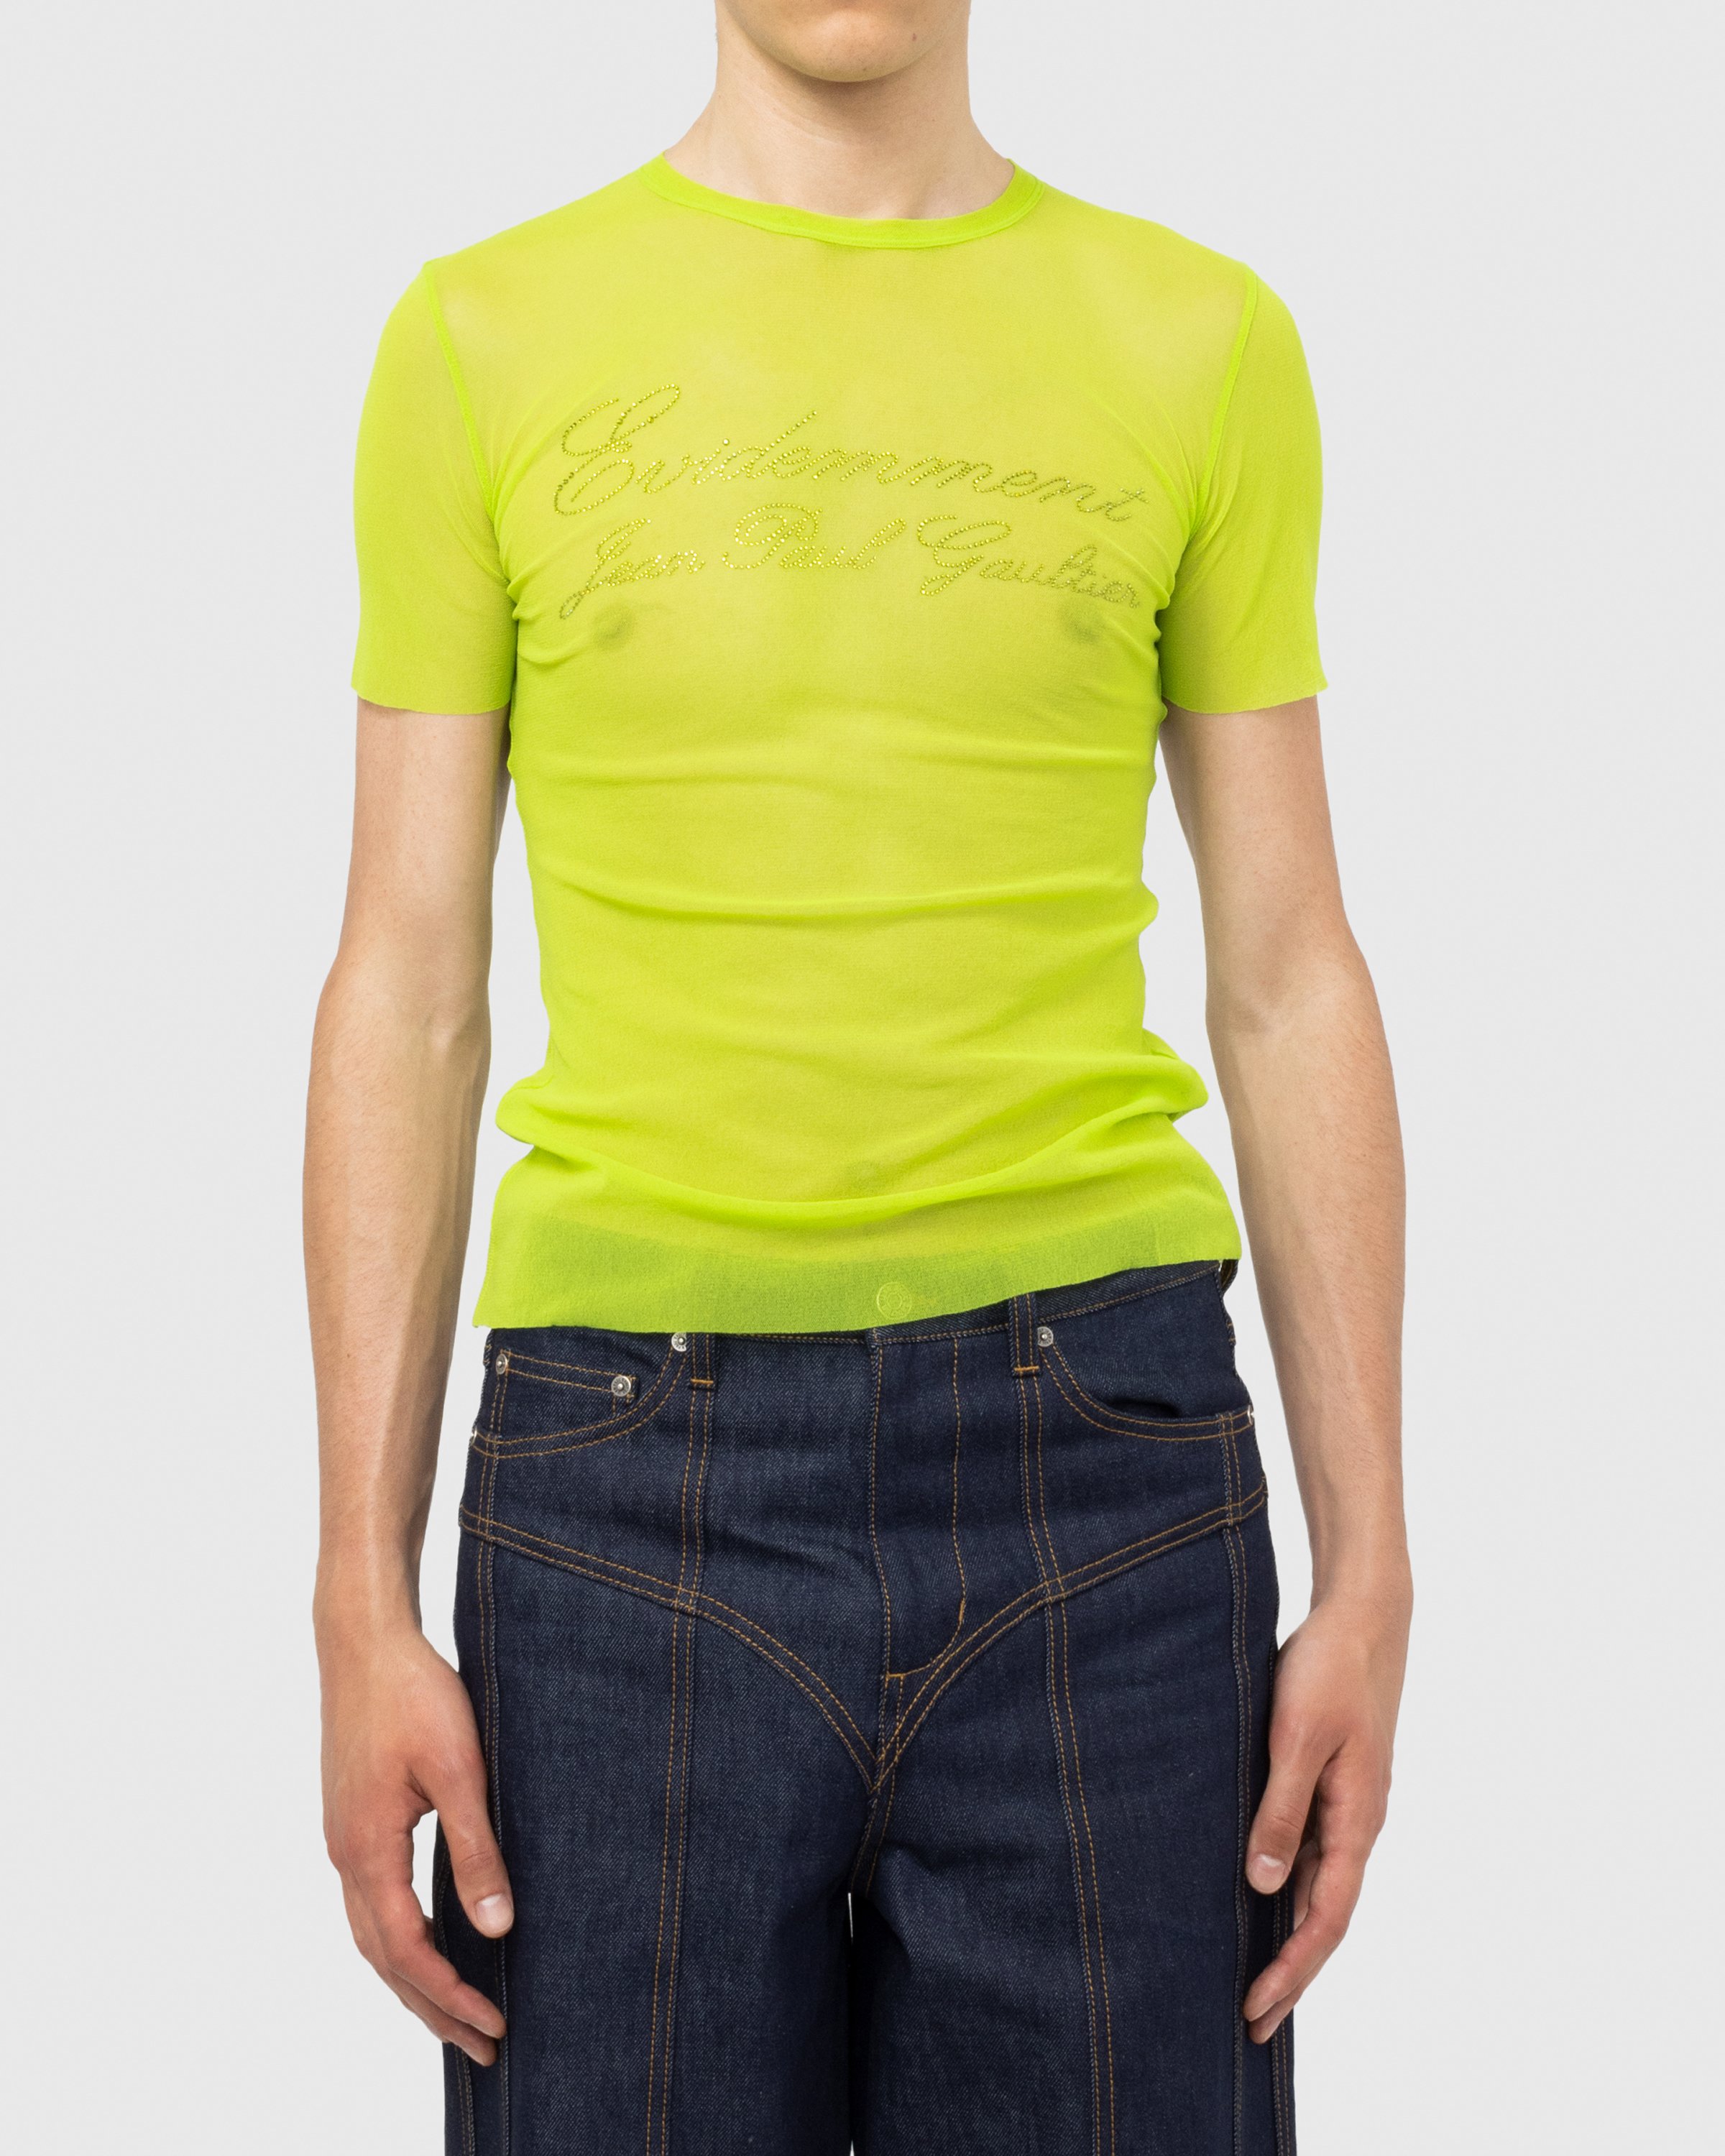 Jean Paul Gaultier - Évidemment Tulle T-Shirt Lime Green - Clothing - Green - Image 2